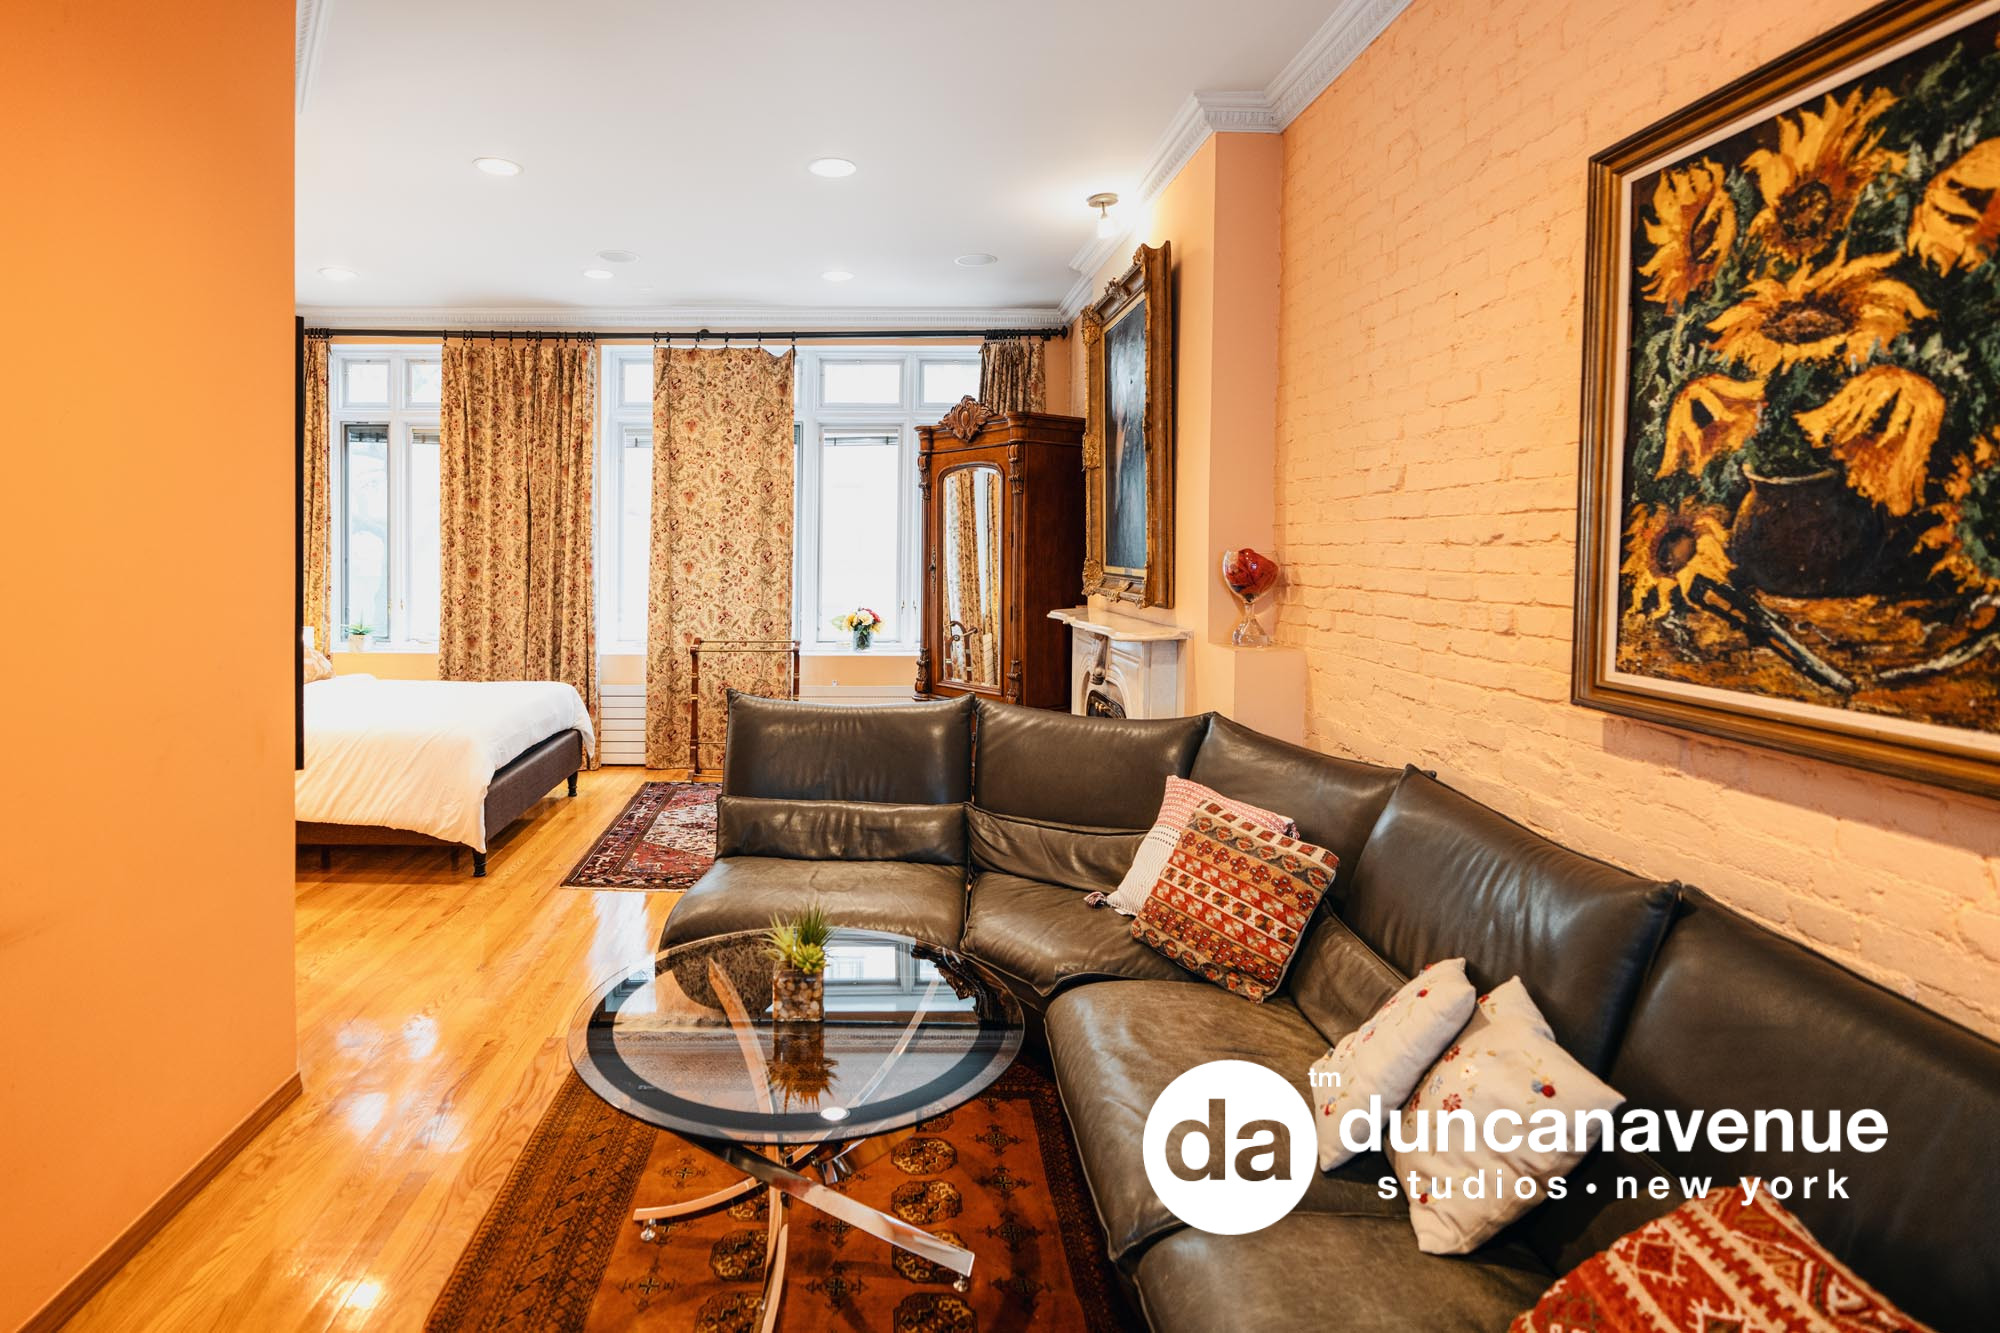 Midtown East Luxury Airbnb Listing – NYC Airbnb Photography – Capture the Beauty of Your Property with New York City's Premier Airbnb Photography Studio